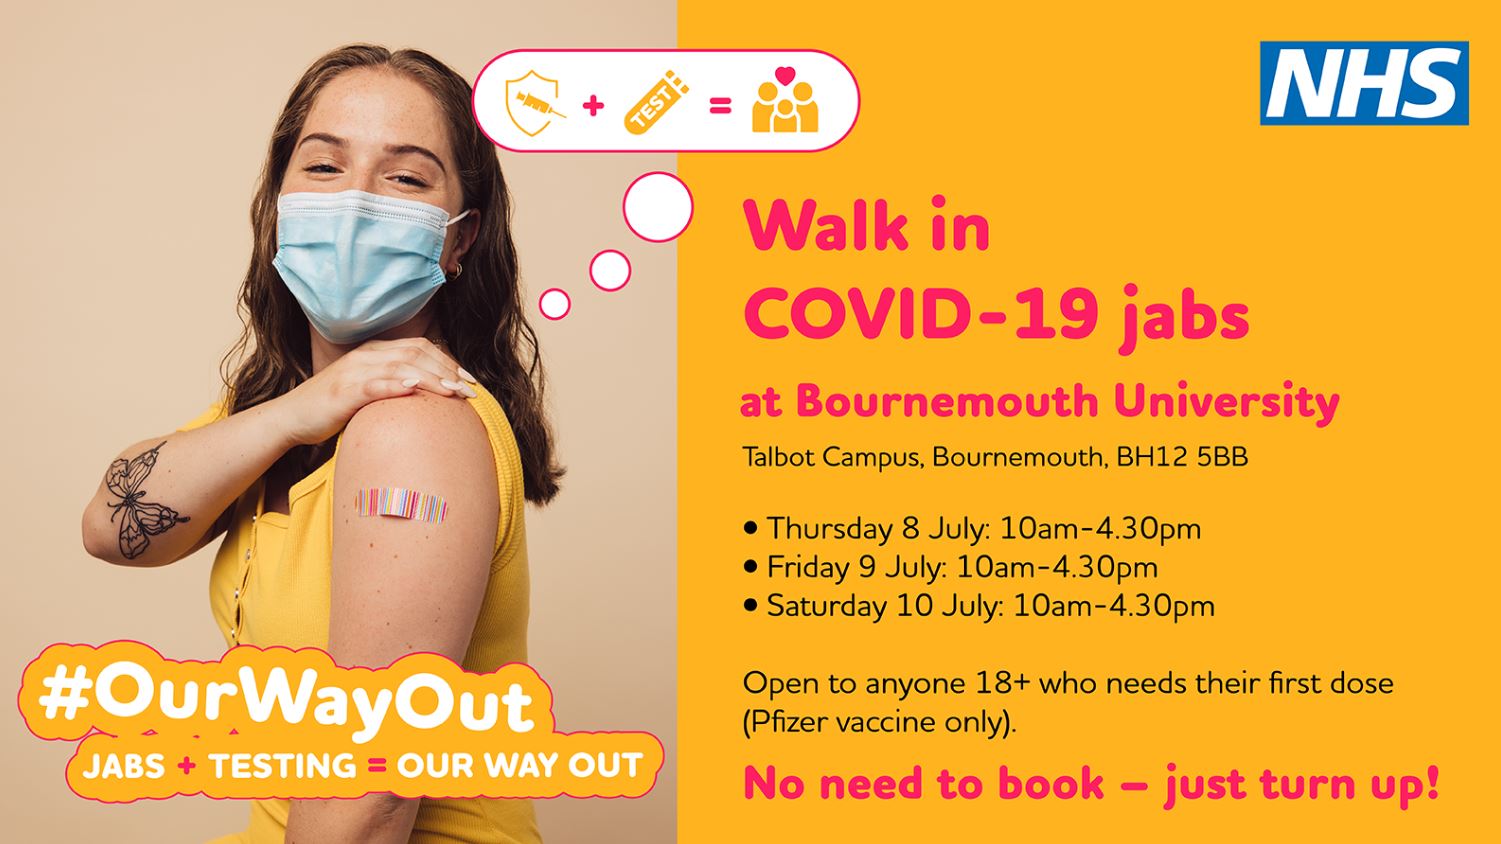 <p>If you still need your first dose of the COVID-19 vaccine you can ‘grab a jab’ at a number of walk-in clinics across Dorset this Saturday (10 July).</p>